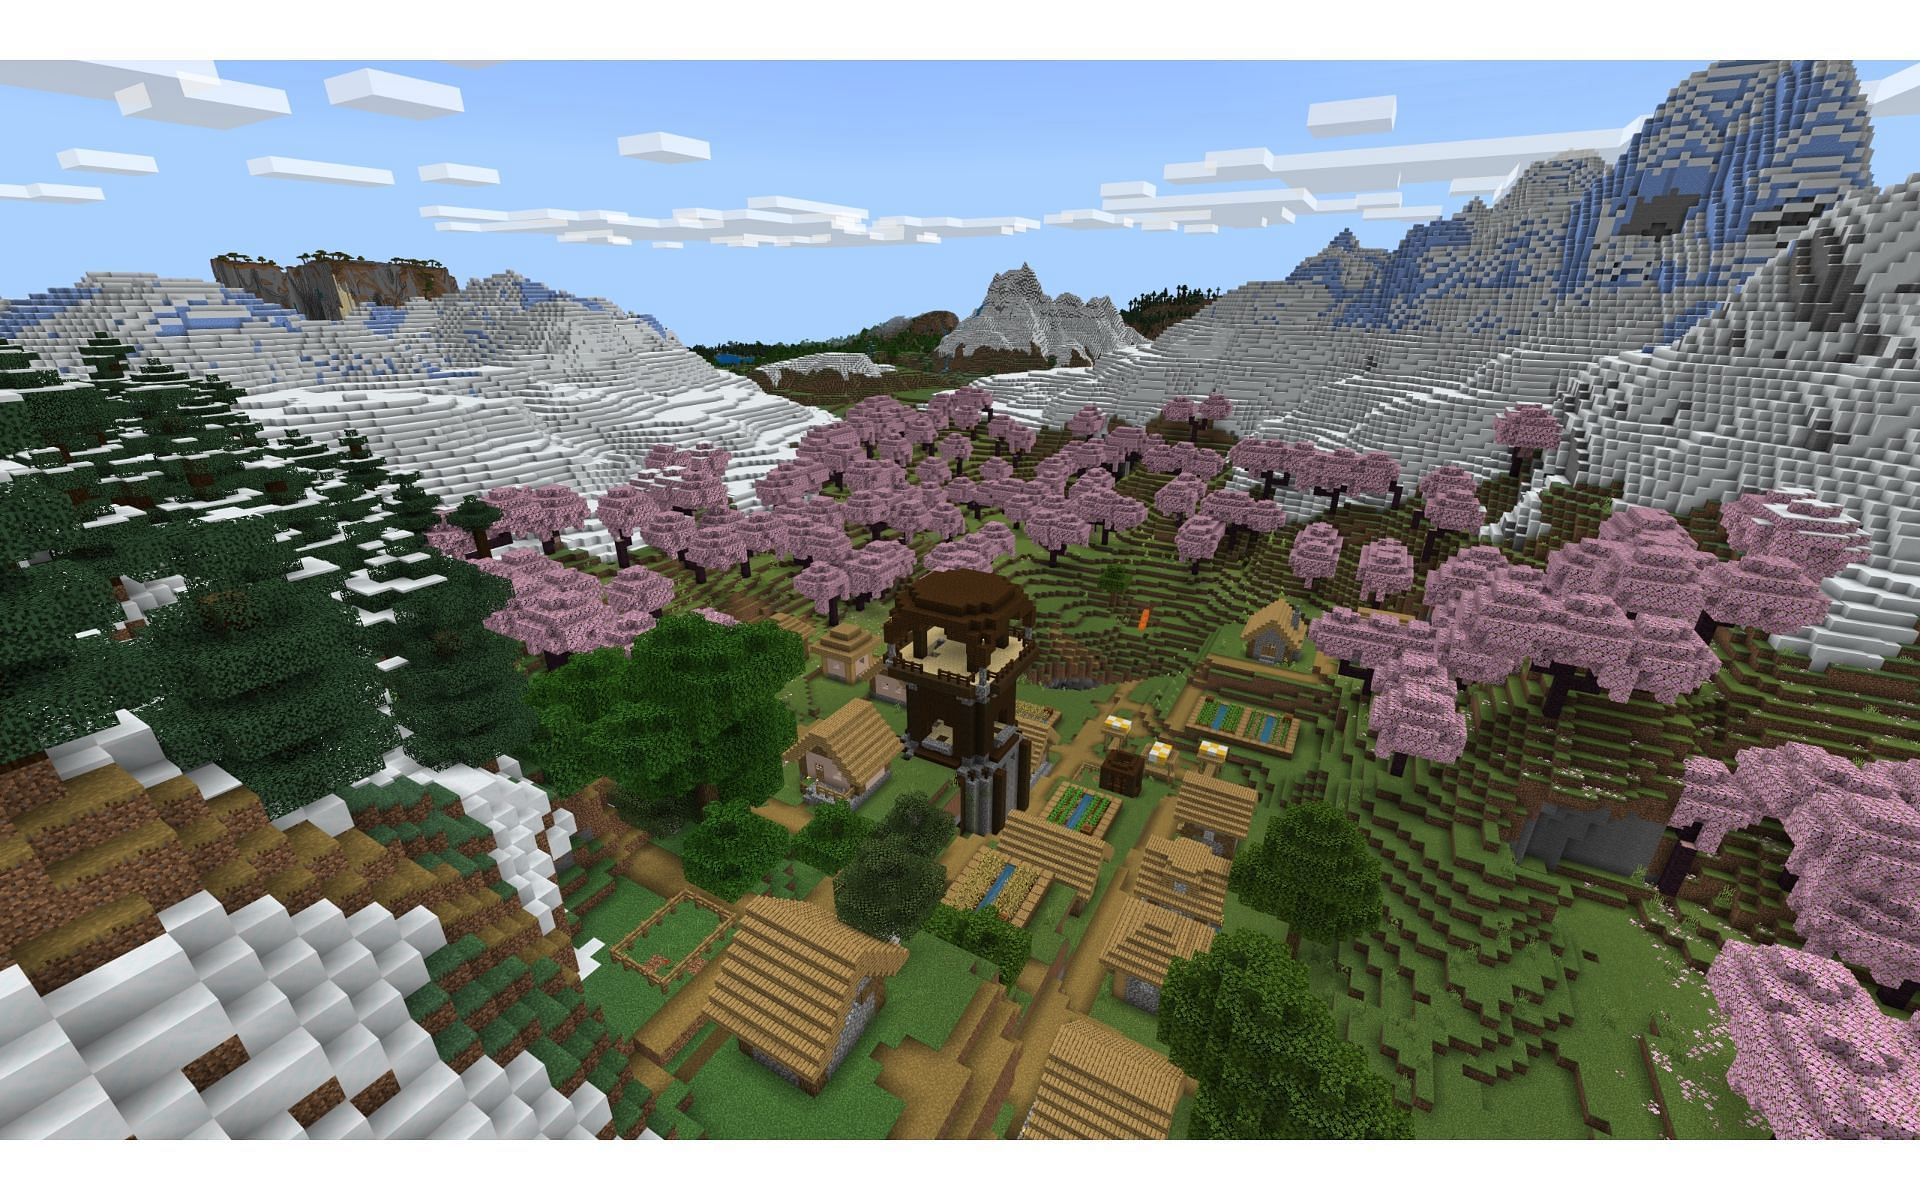 For a tranquil experience, this seed is perfect (Image via Mojang)